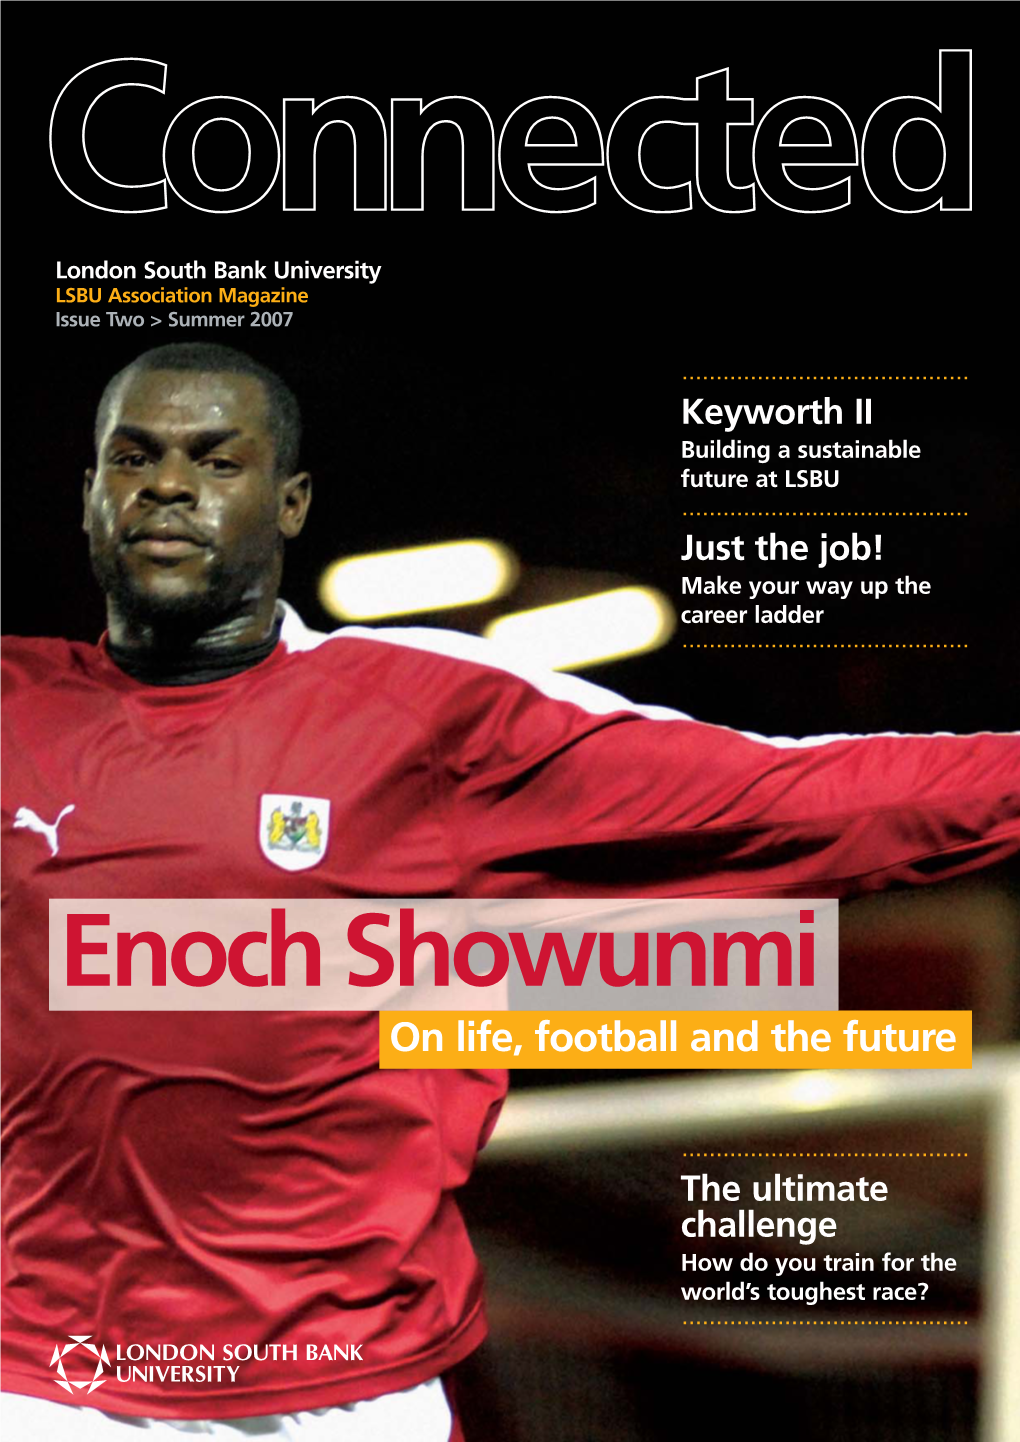 Enoch Showunmi on Life, Football and the Future